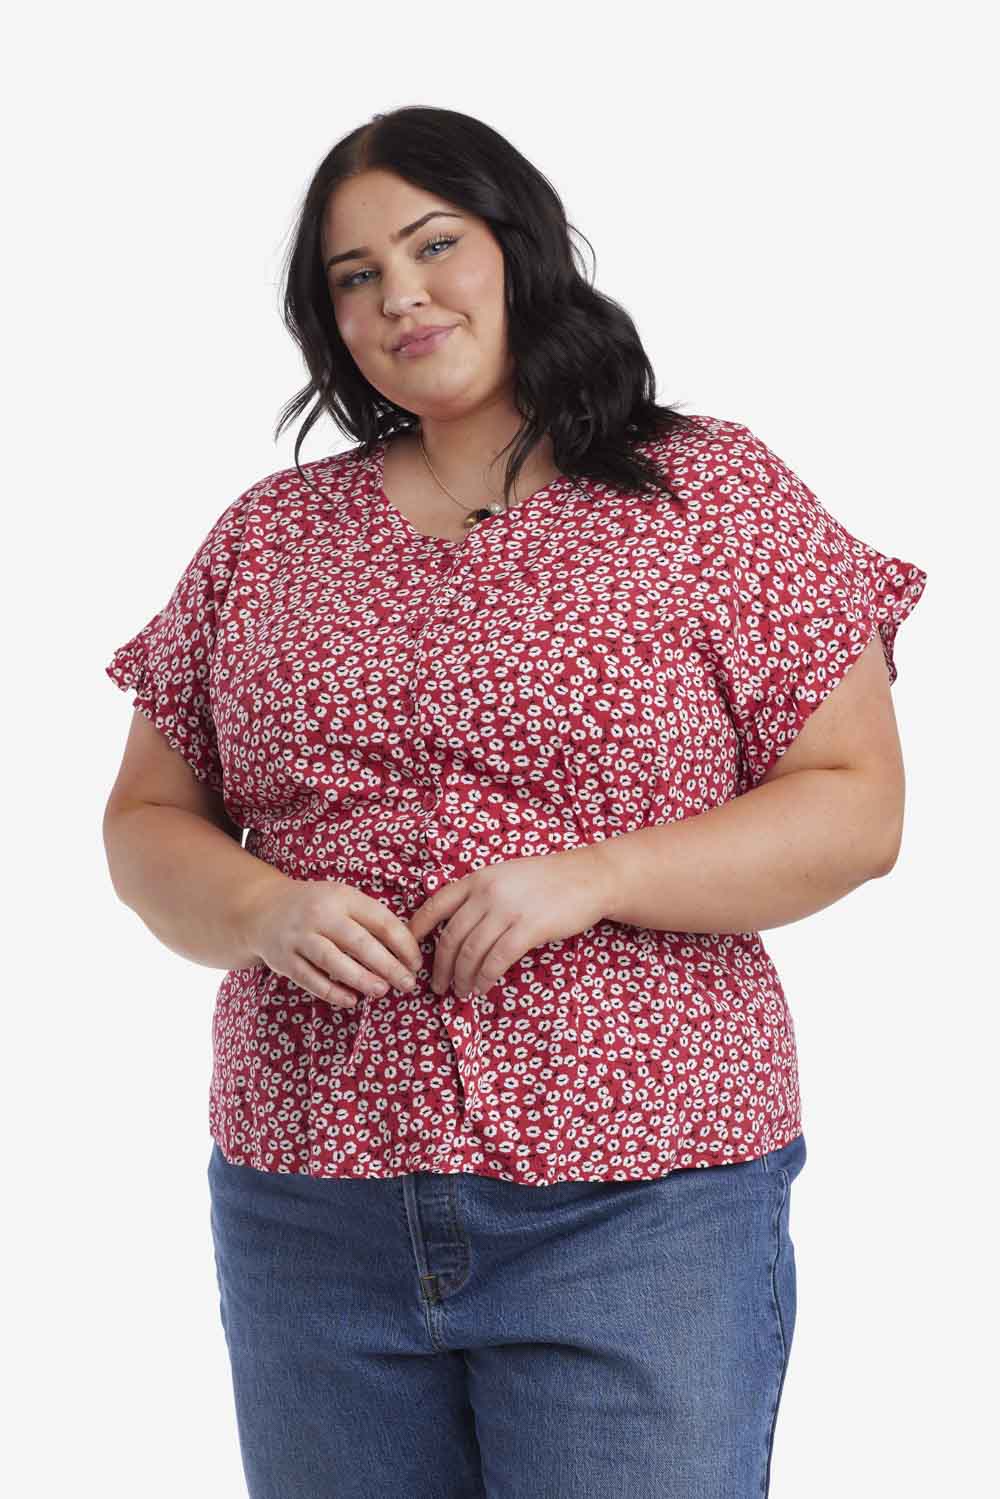 Joselyn Red Floral Top